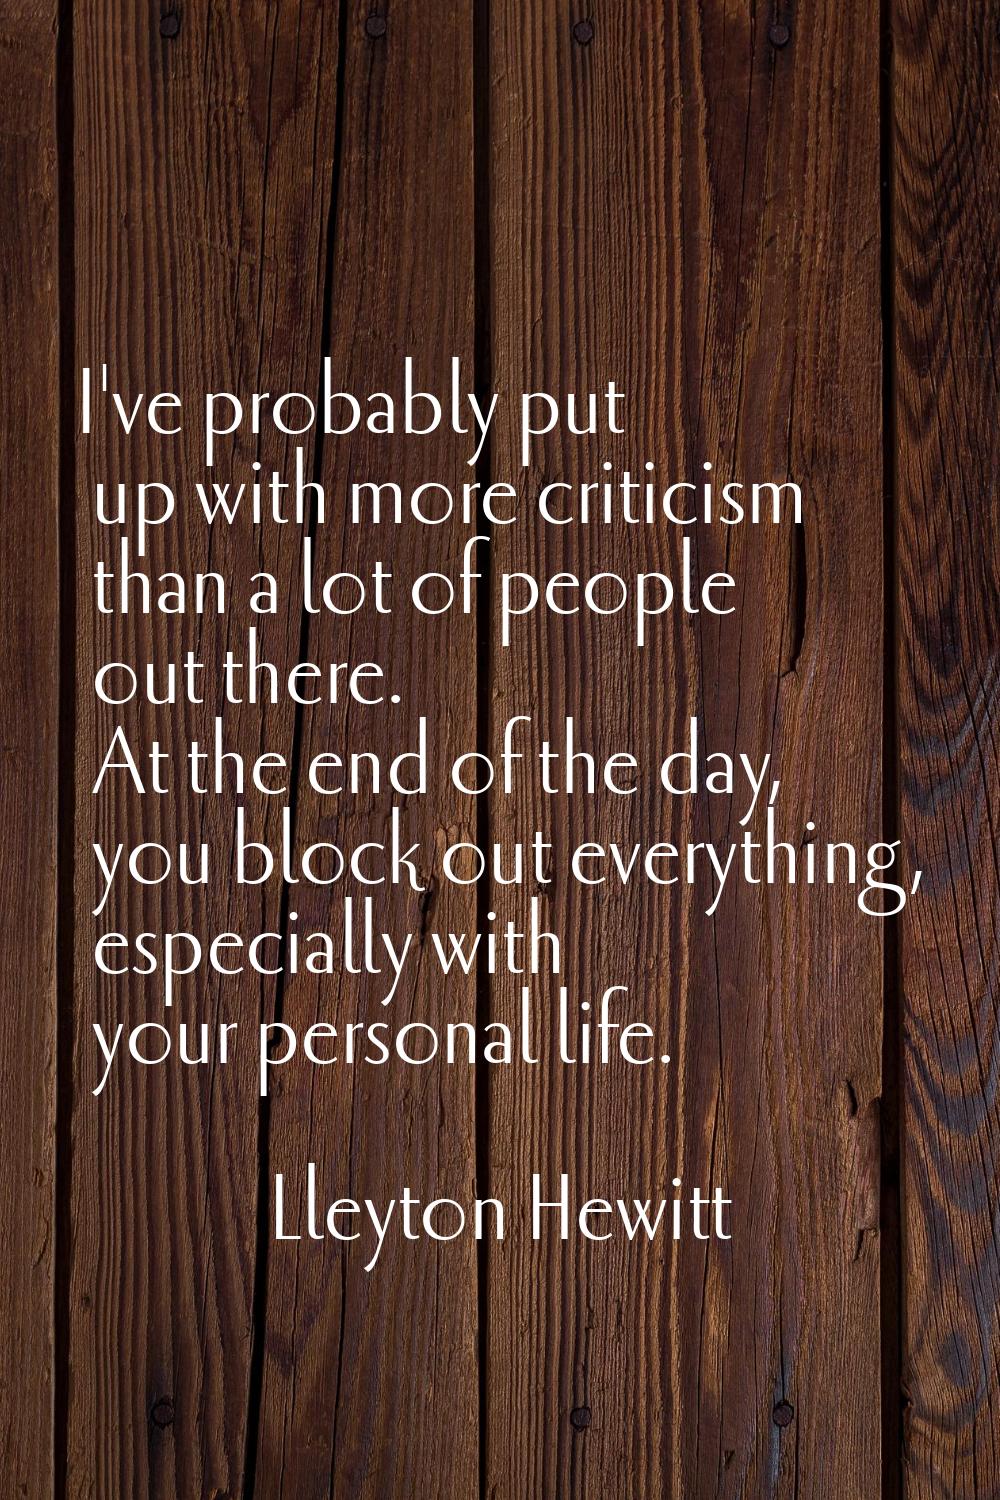 I've probably put up with more criticism than a lot of people out there. At the end of the day, you